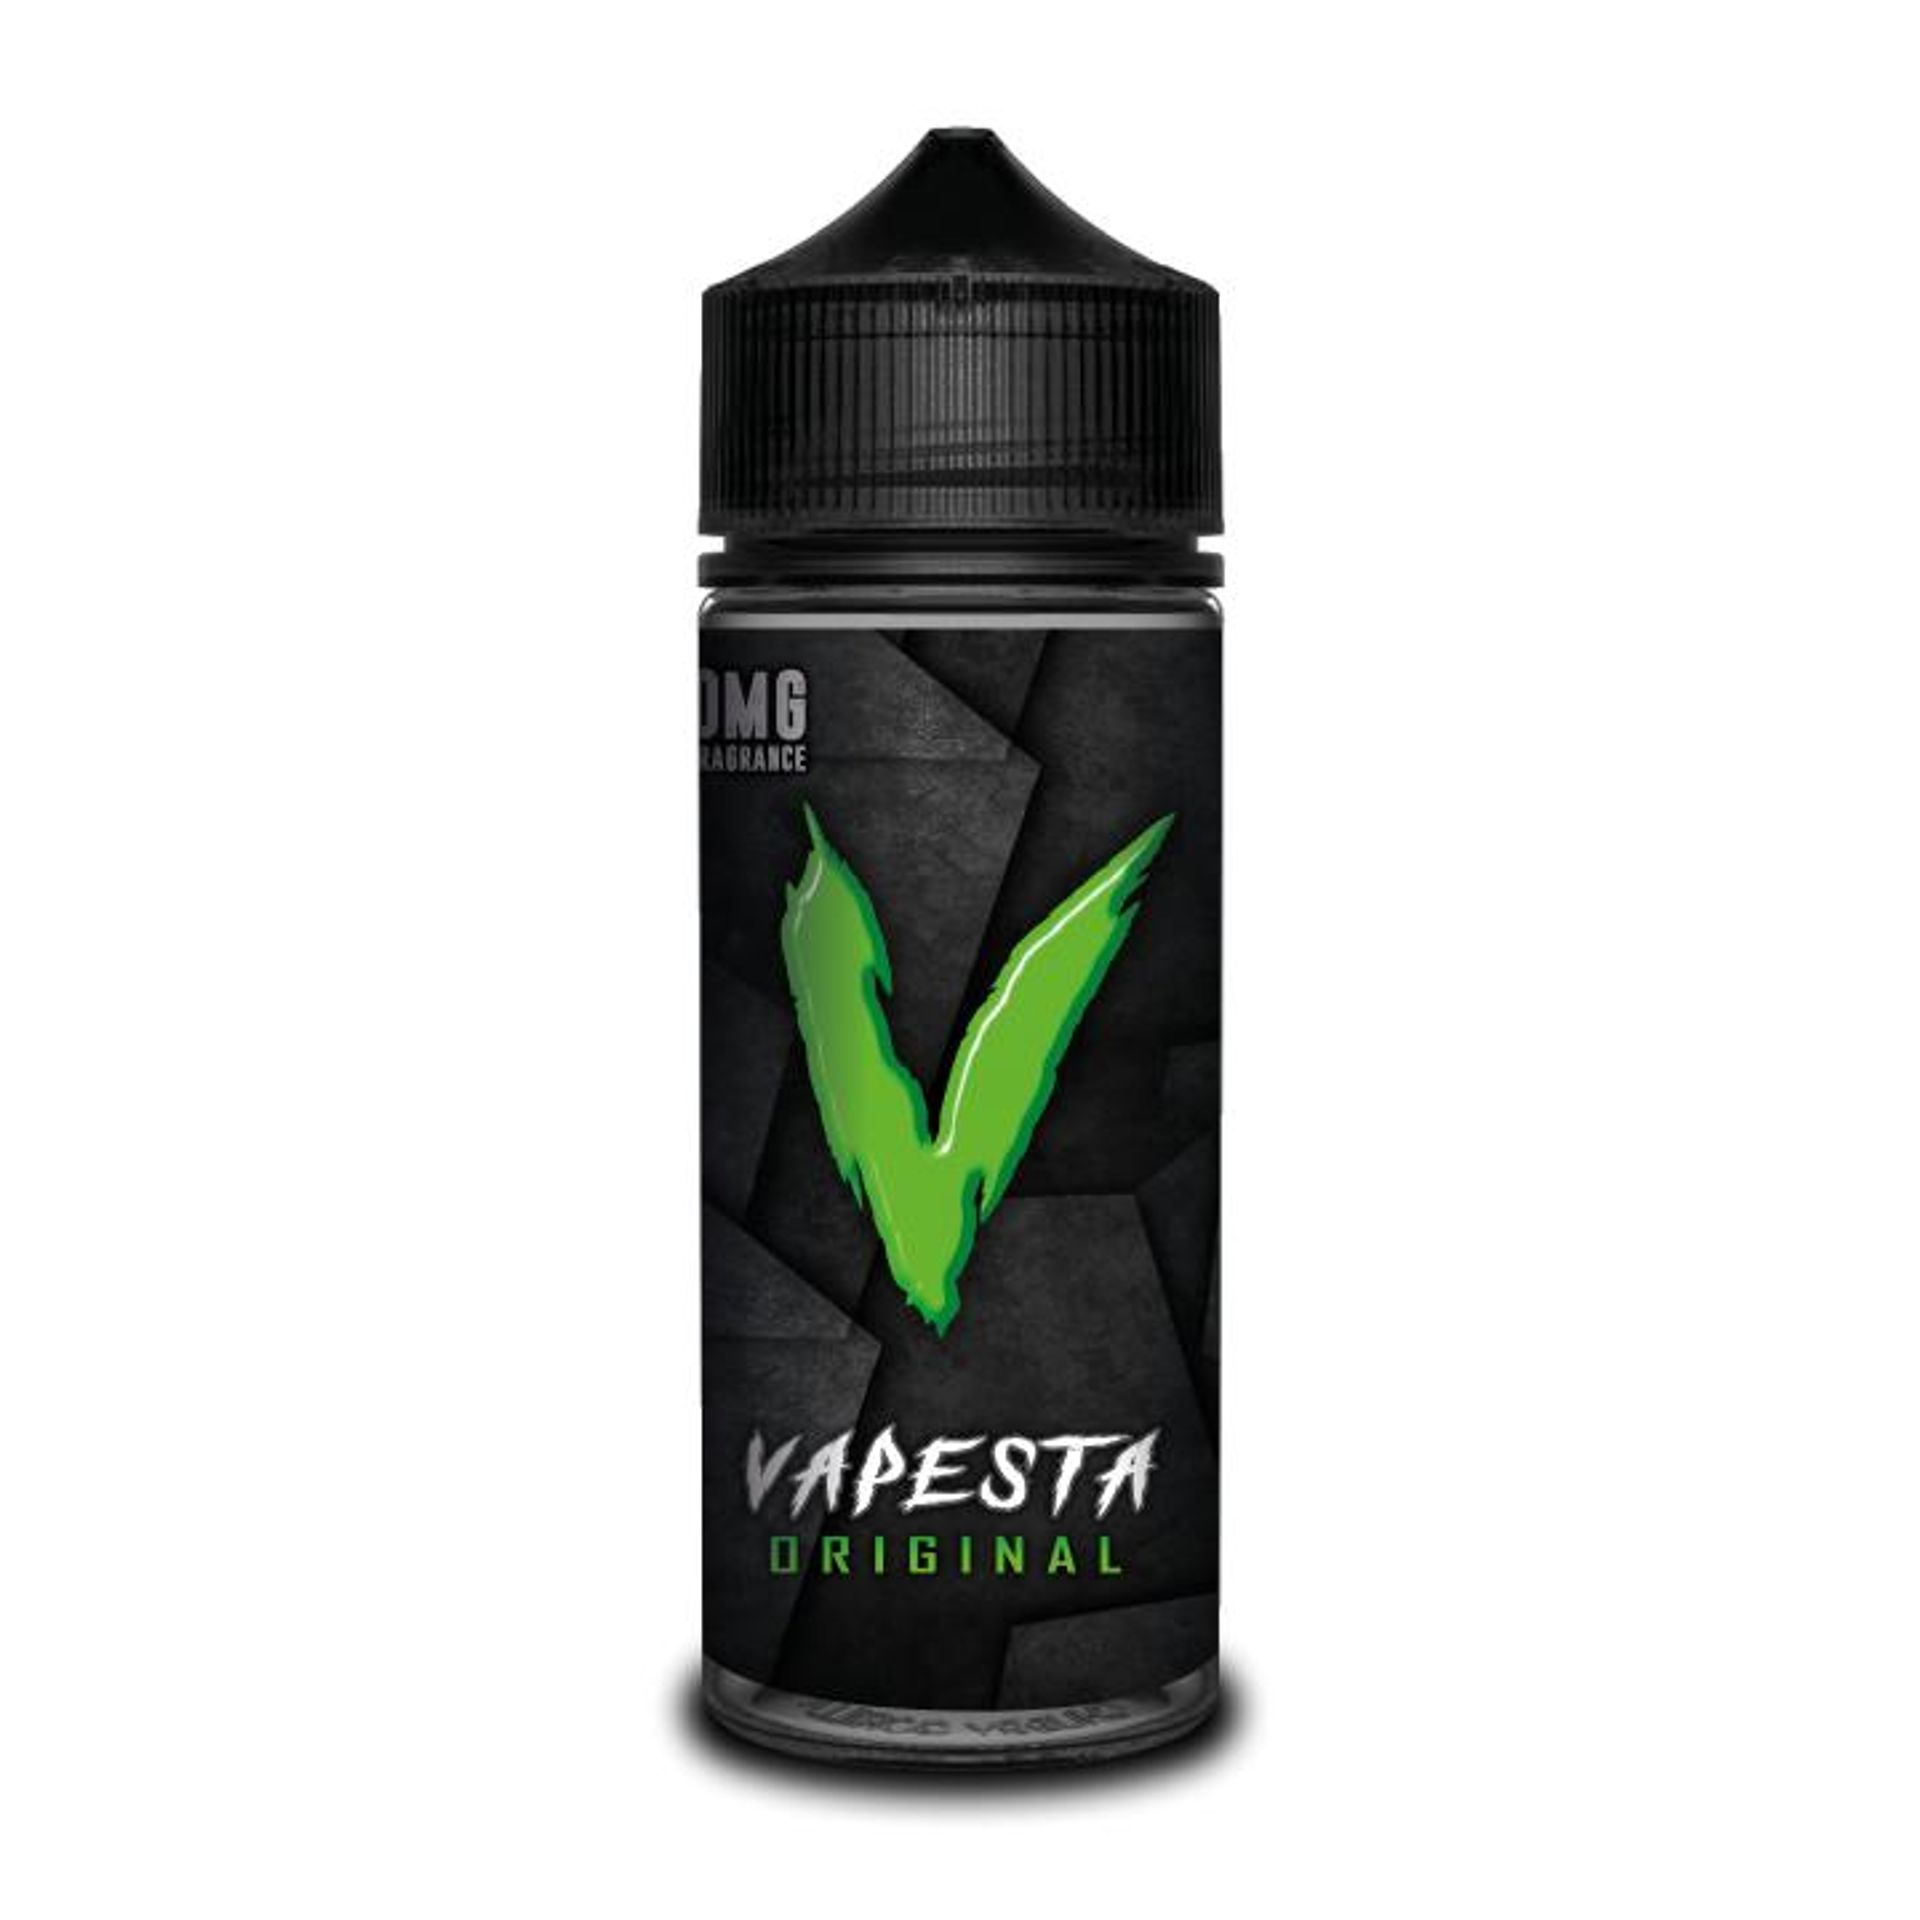 Image of Original by Vapesta by Ultimate Puff